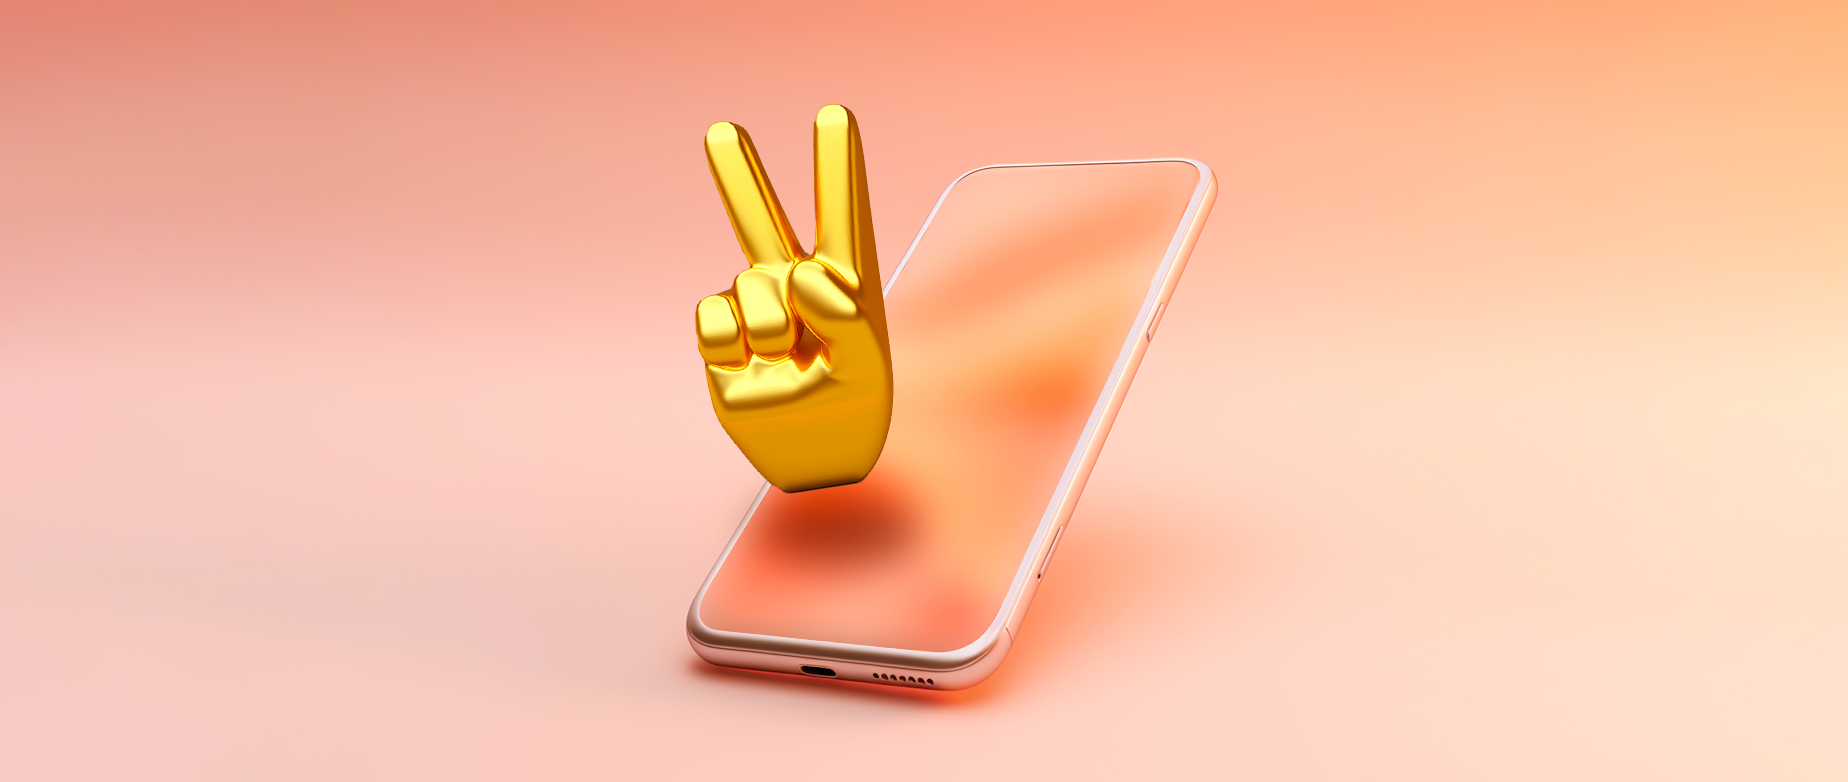 A gold hand giving a peace sign next to a phone on a peach background.